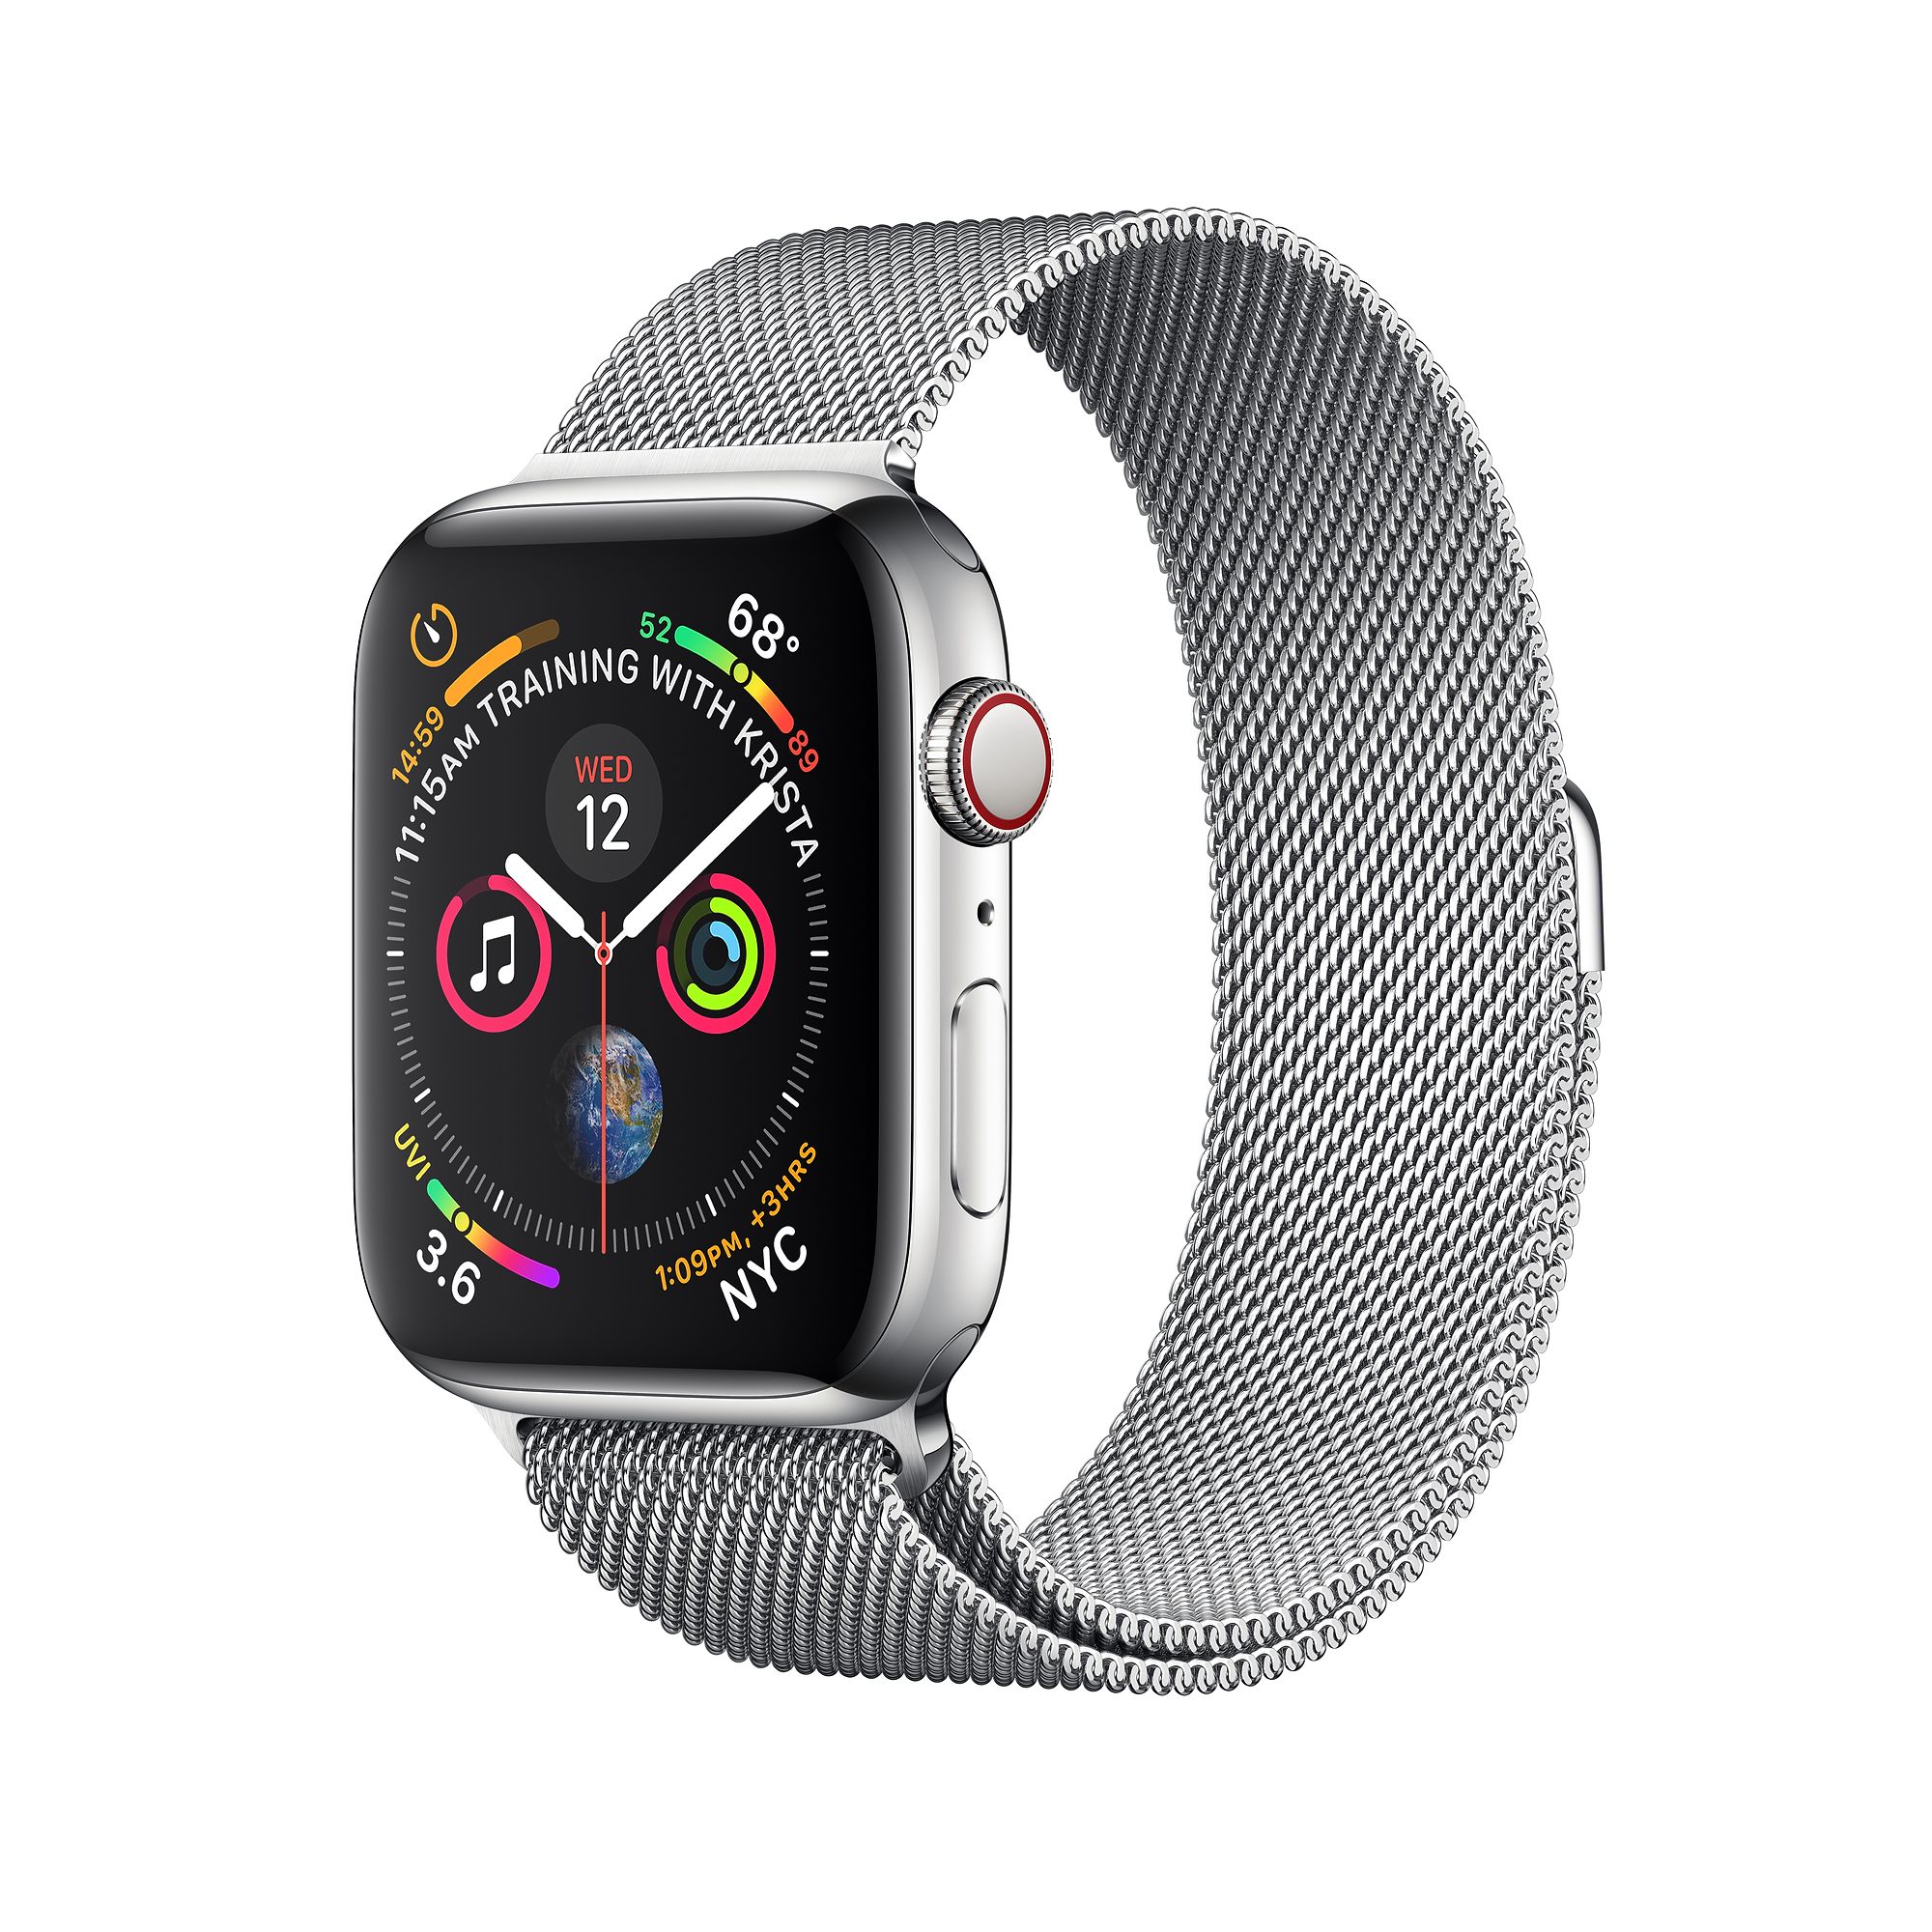 Apple Watch Series 4 - 40mm - Stainless Steel (LTE)  Chưa Active - 8.590.000 